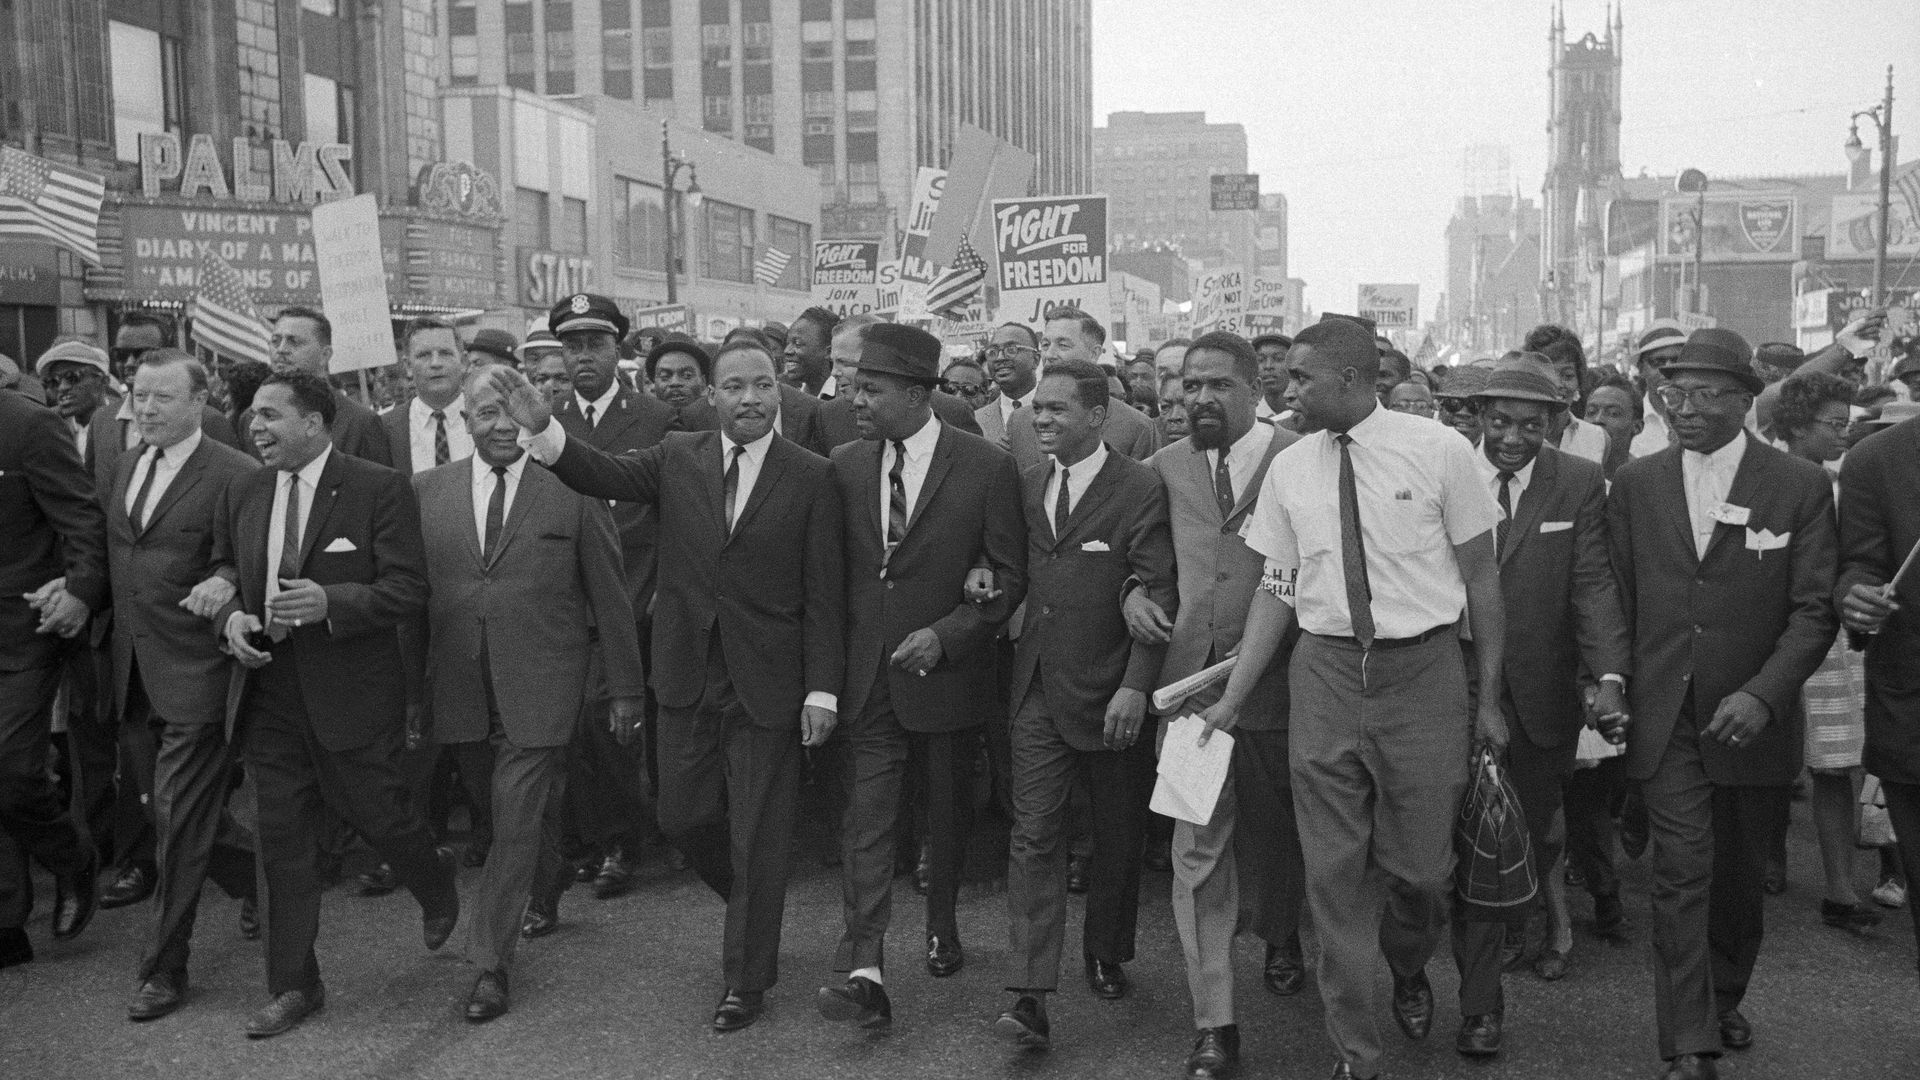 Martin Luther King Jr. is pictured among a huge group of people marching in Detroit, waving. 